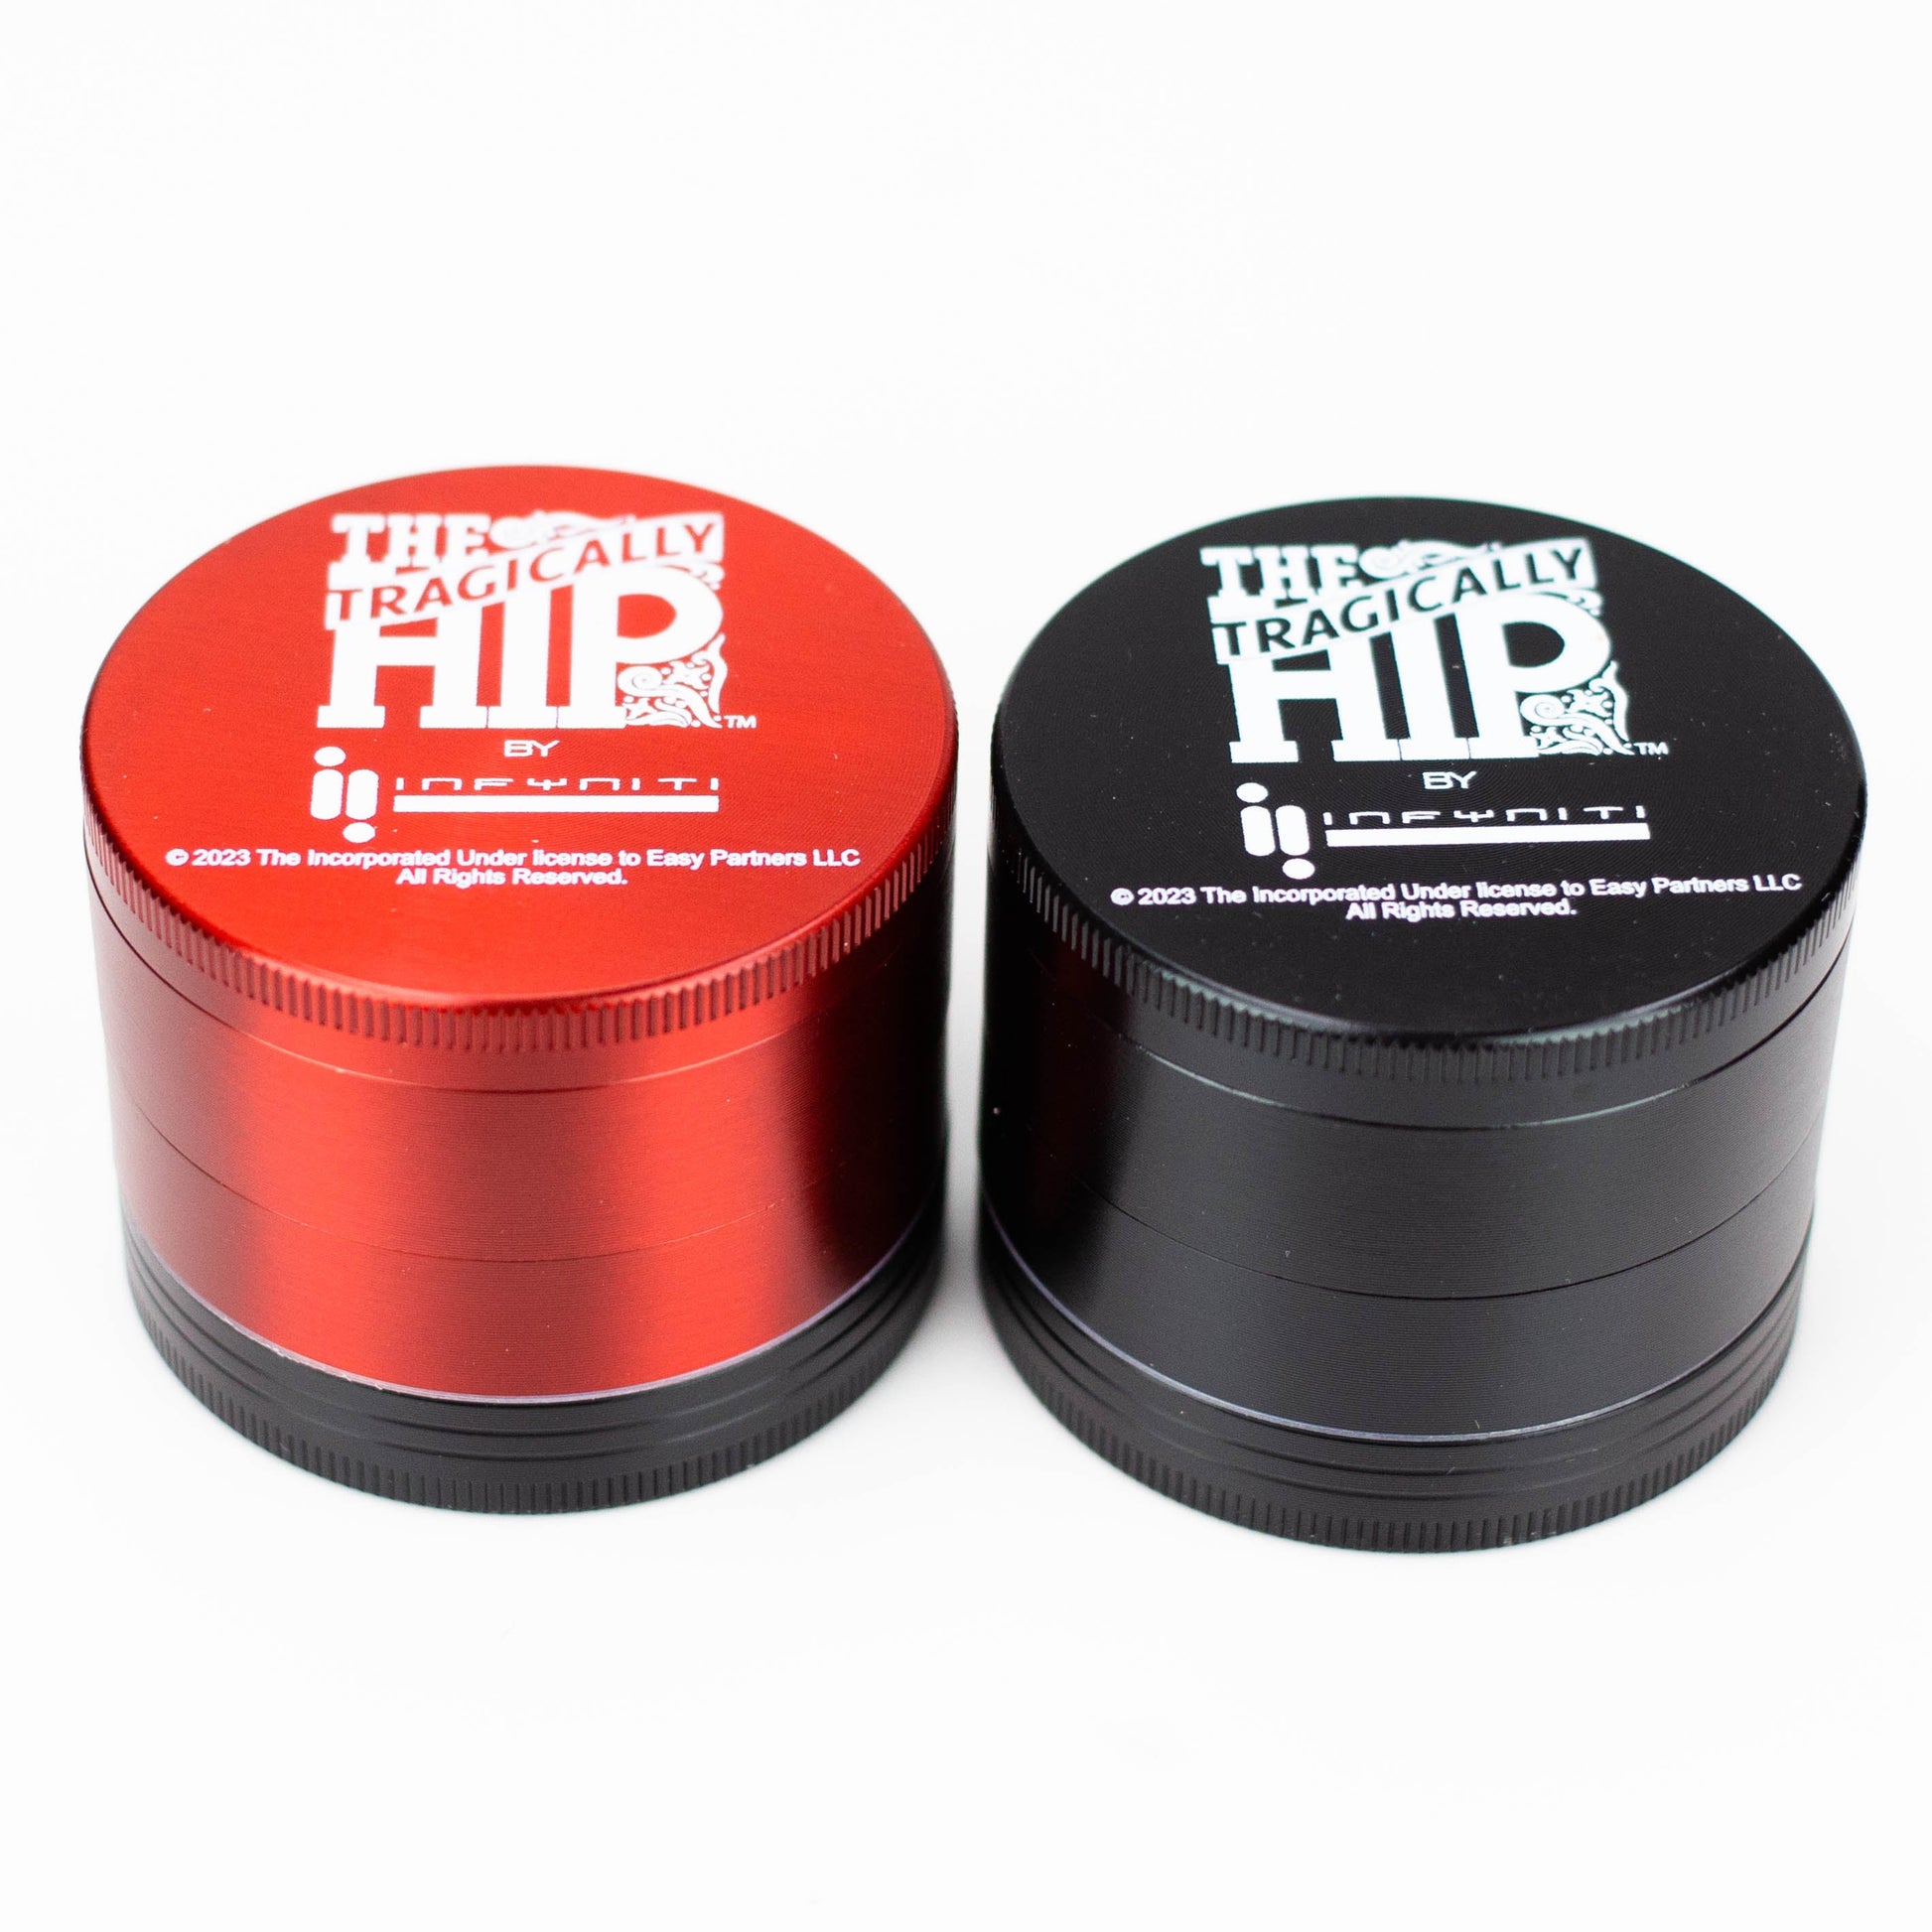 THE TRAGICALLY HIP - 4 parts metal red grinder by Infyniti_1